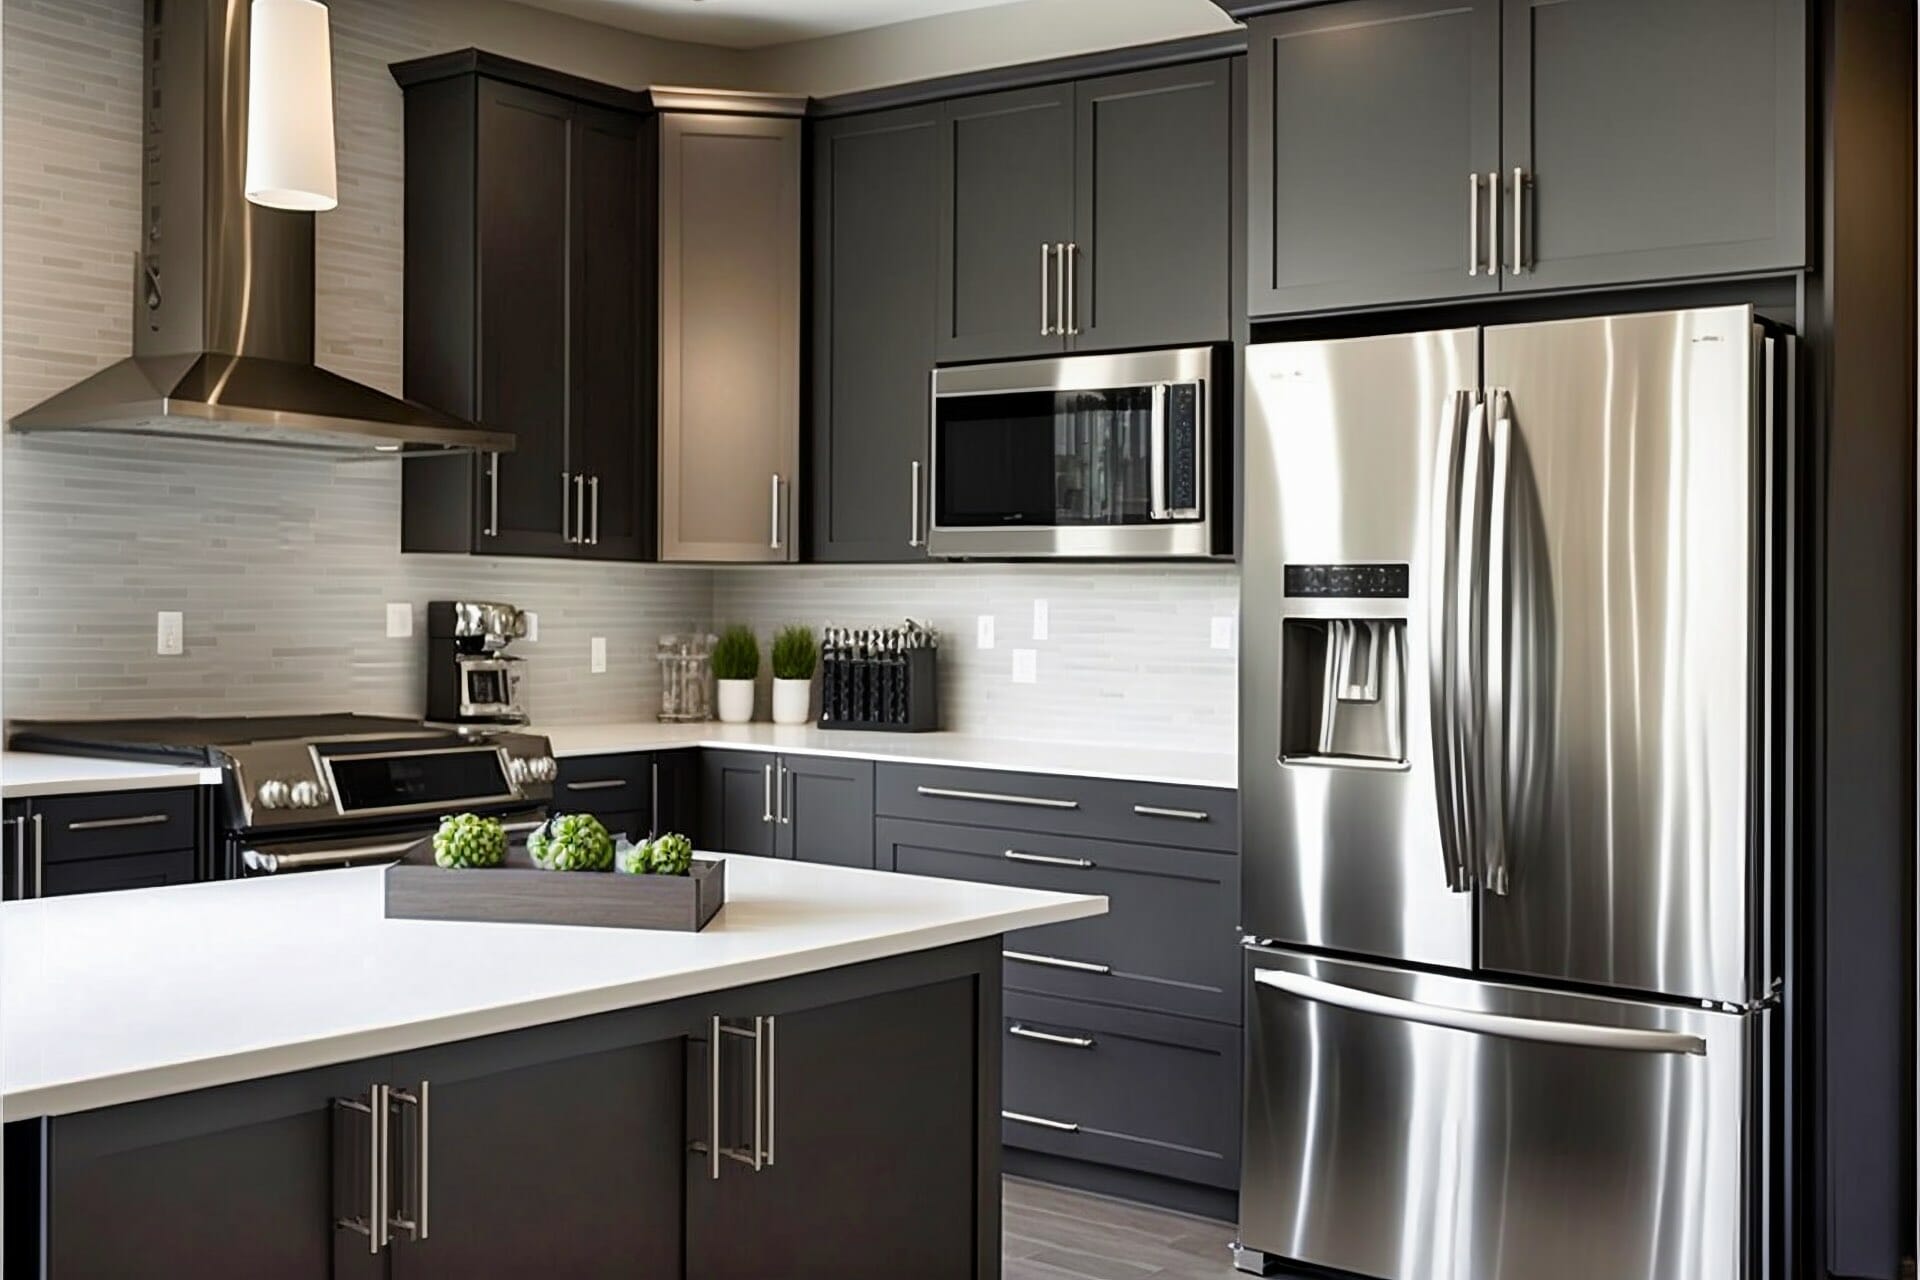 This Sophisticated And Modern Kitchen Features Dark Grey Cabinetry And White Countertops, Creating A Sleek And Modern Atmosphere. The Stainless Steel Appliances Add A Contemporary Touch, While The White Backsplash And Warm Wood Accents Complete The Look.